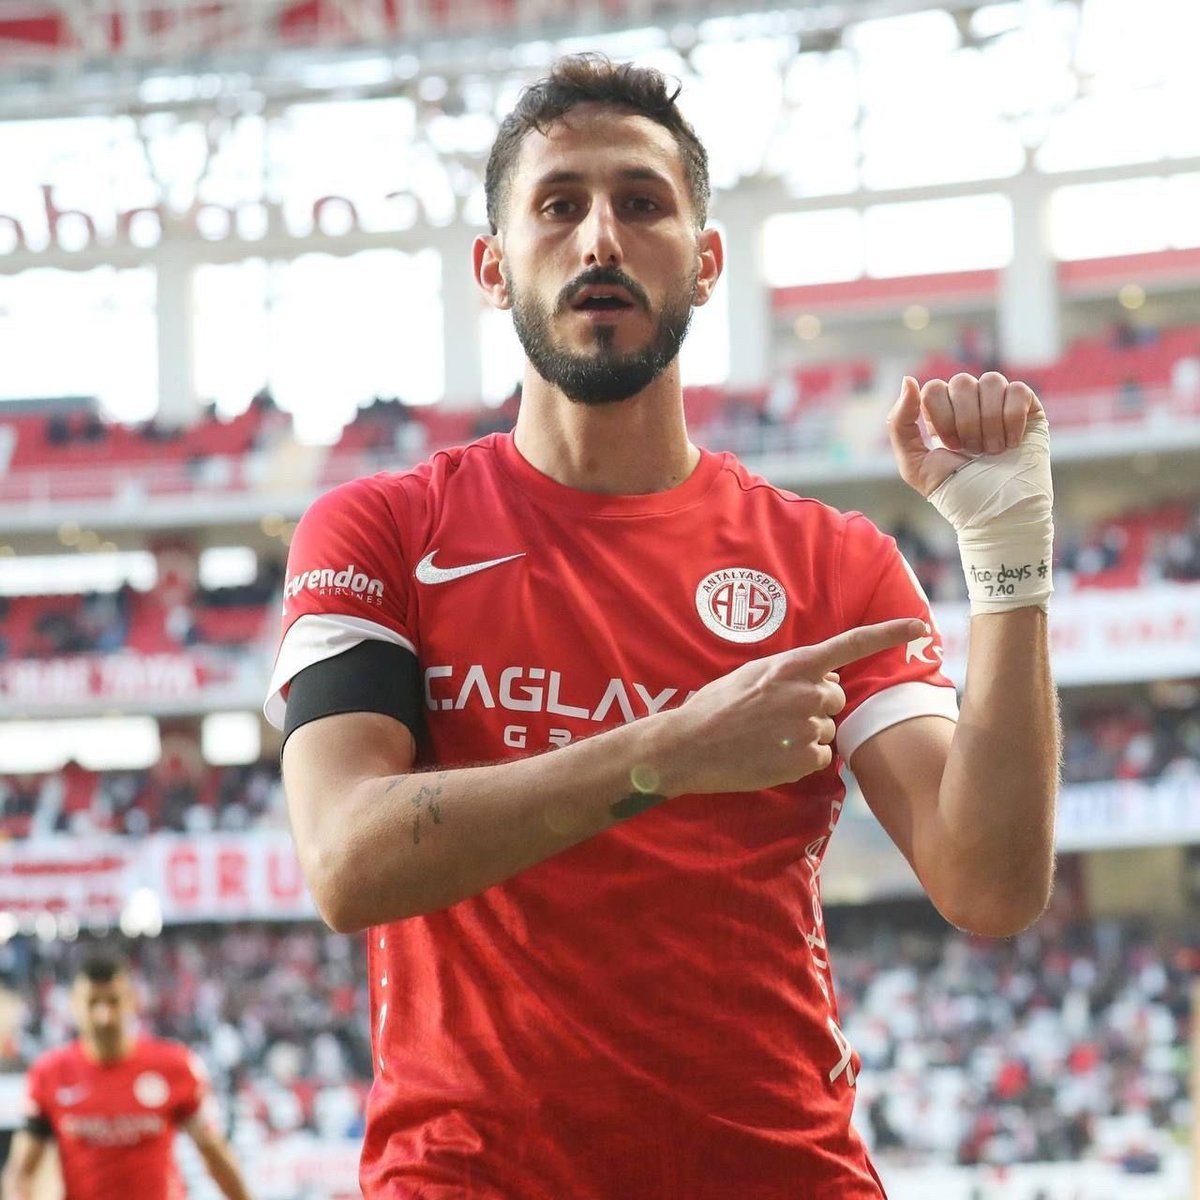 Welcome to Turkey’s Midnight Express. This is unbelievable. An Israeli football player, Sagiv Yehezkel, scored a goal for Antalyaspor, a Turkish team. He made a gesture “100” for the Israelis who have been held hostage by Hamas for the past 100 days. All hell broke loose: